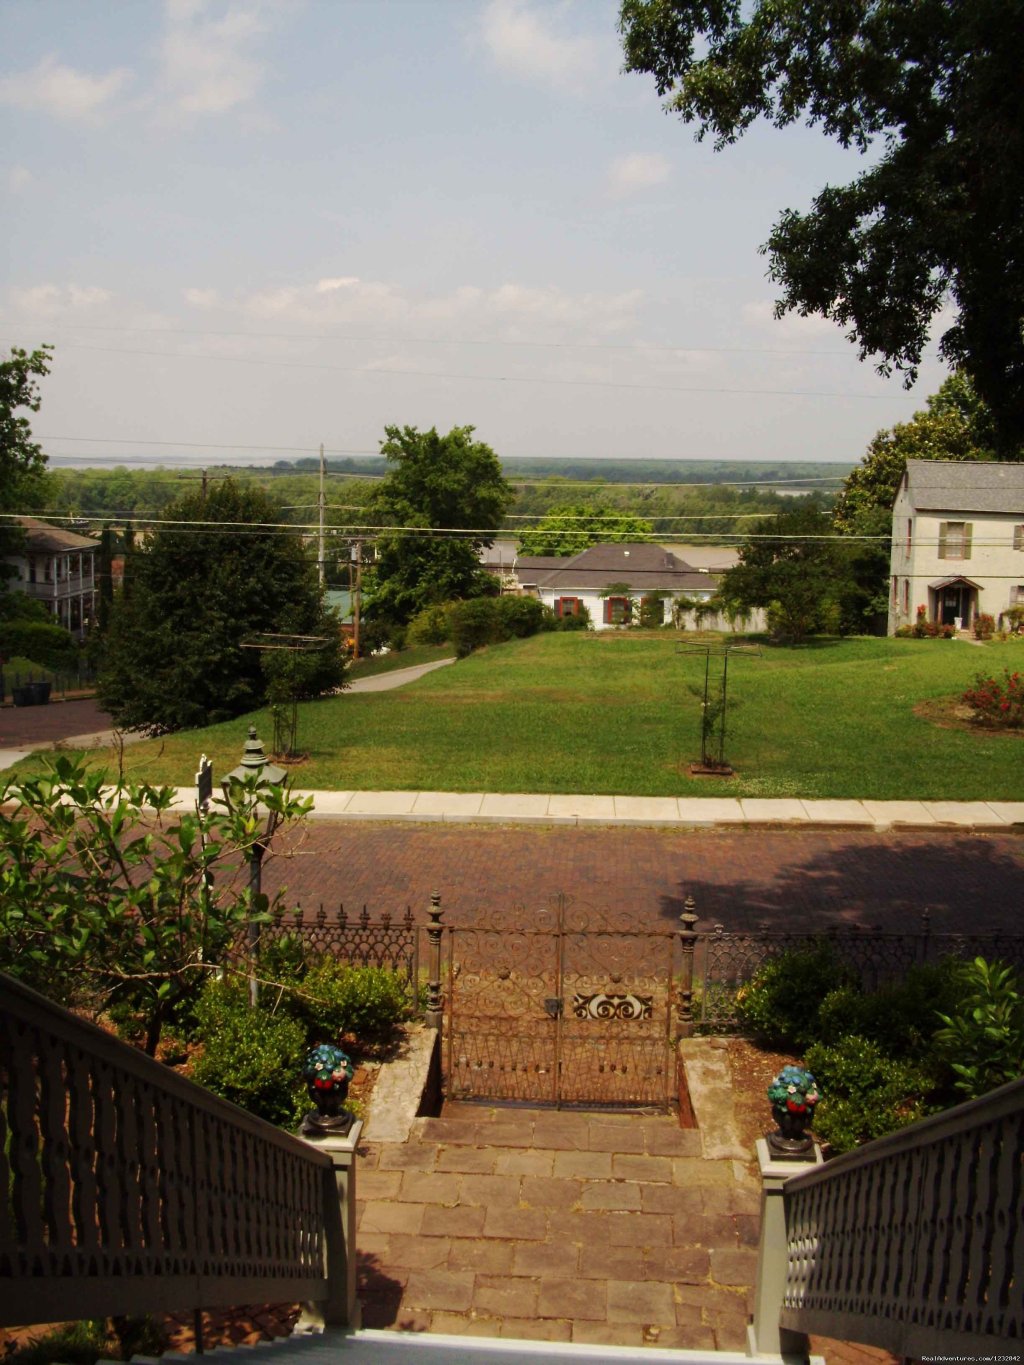 The view from the front veranda | Corners Mansion Inn  A Romantic Getaway | Image #18/19 | 